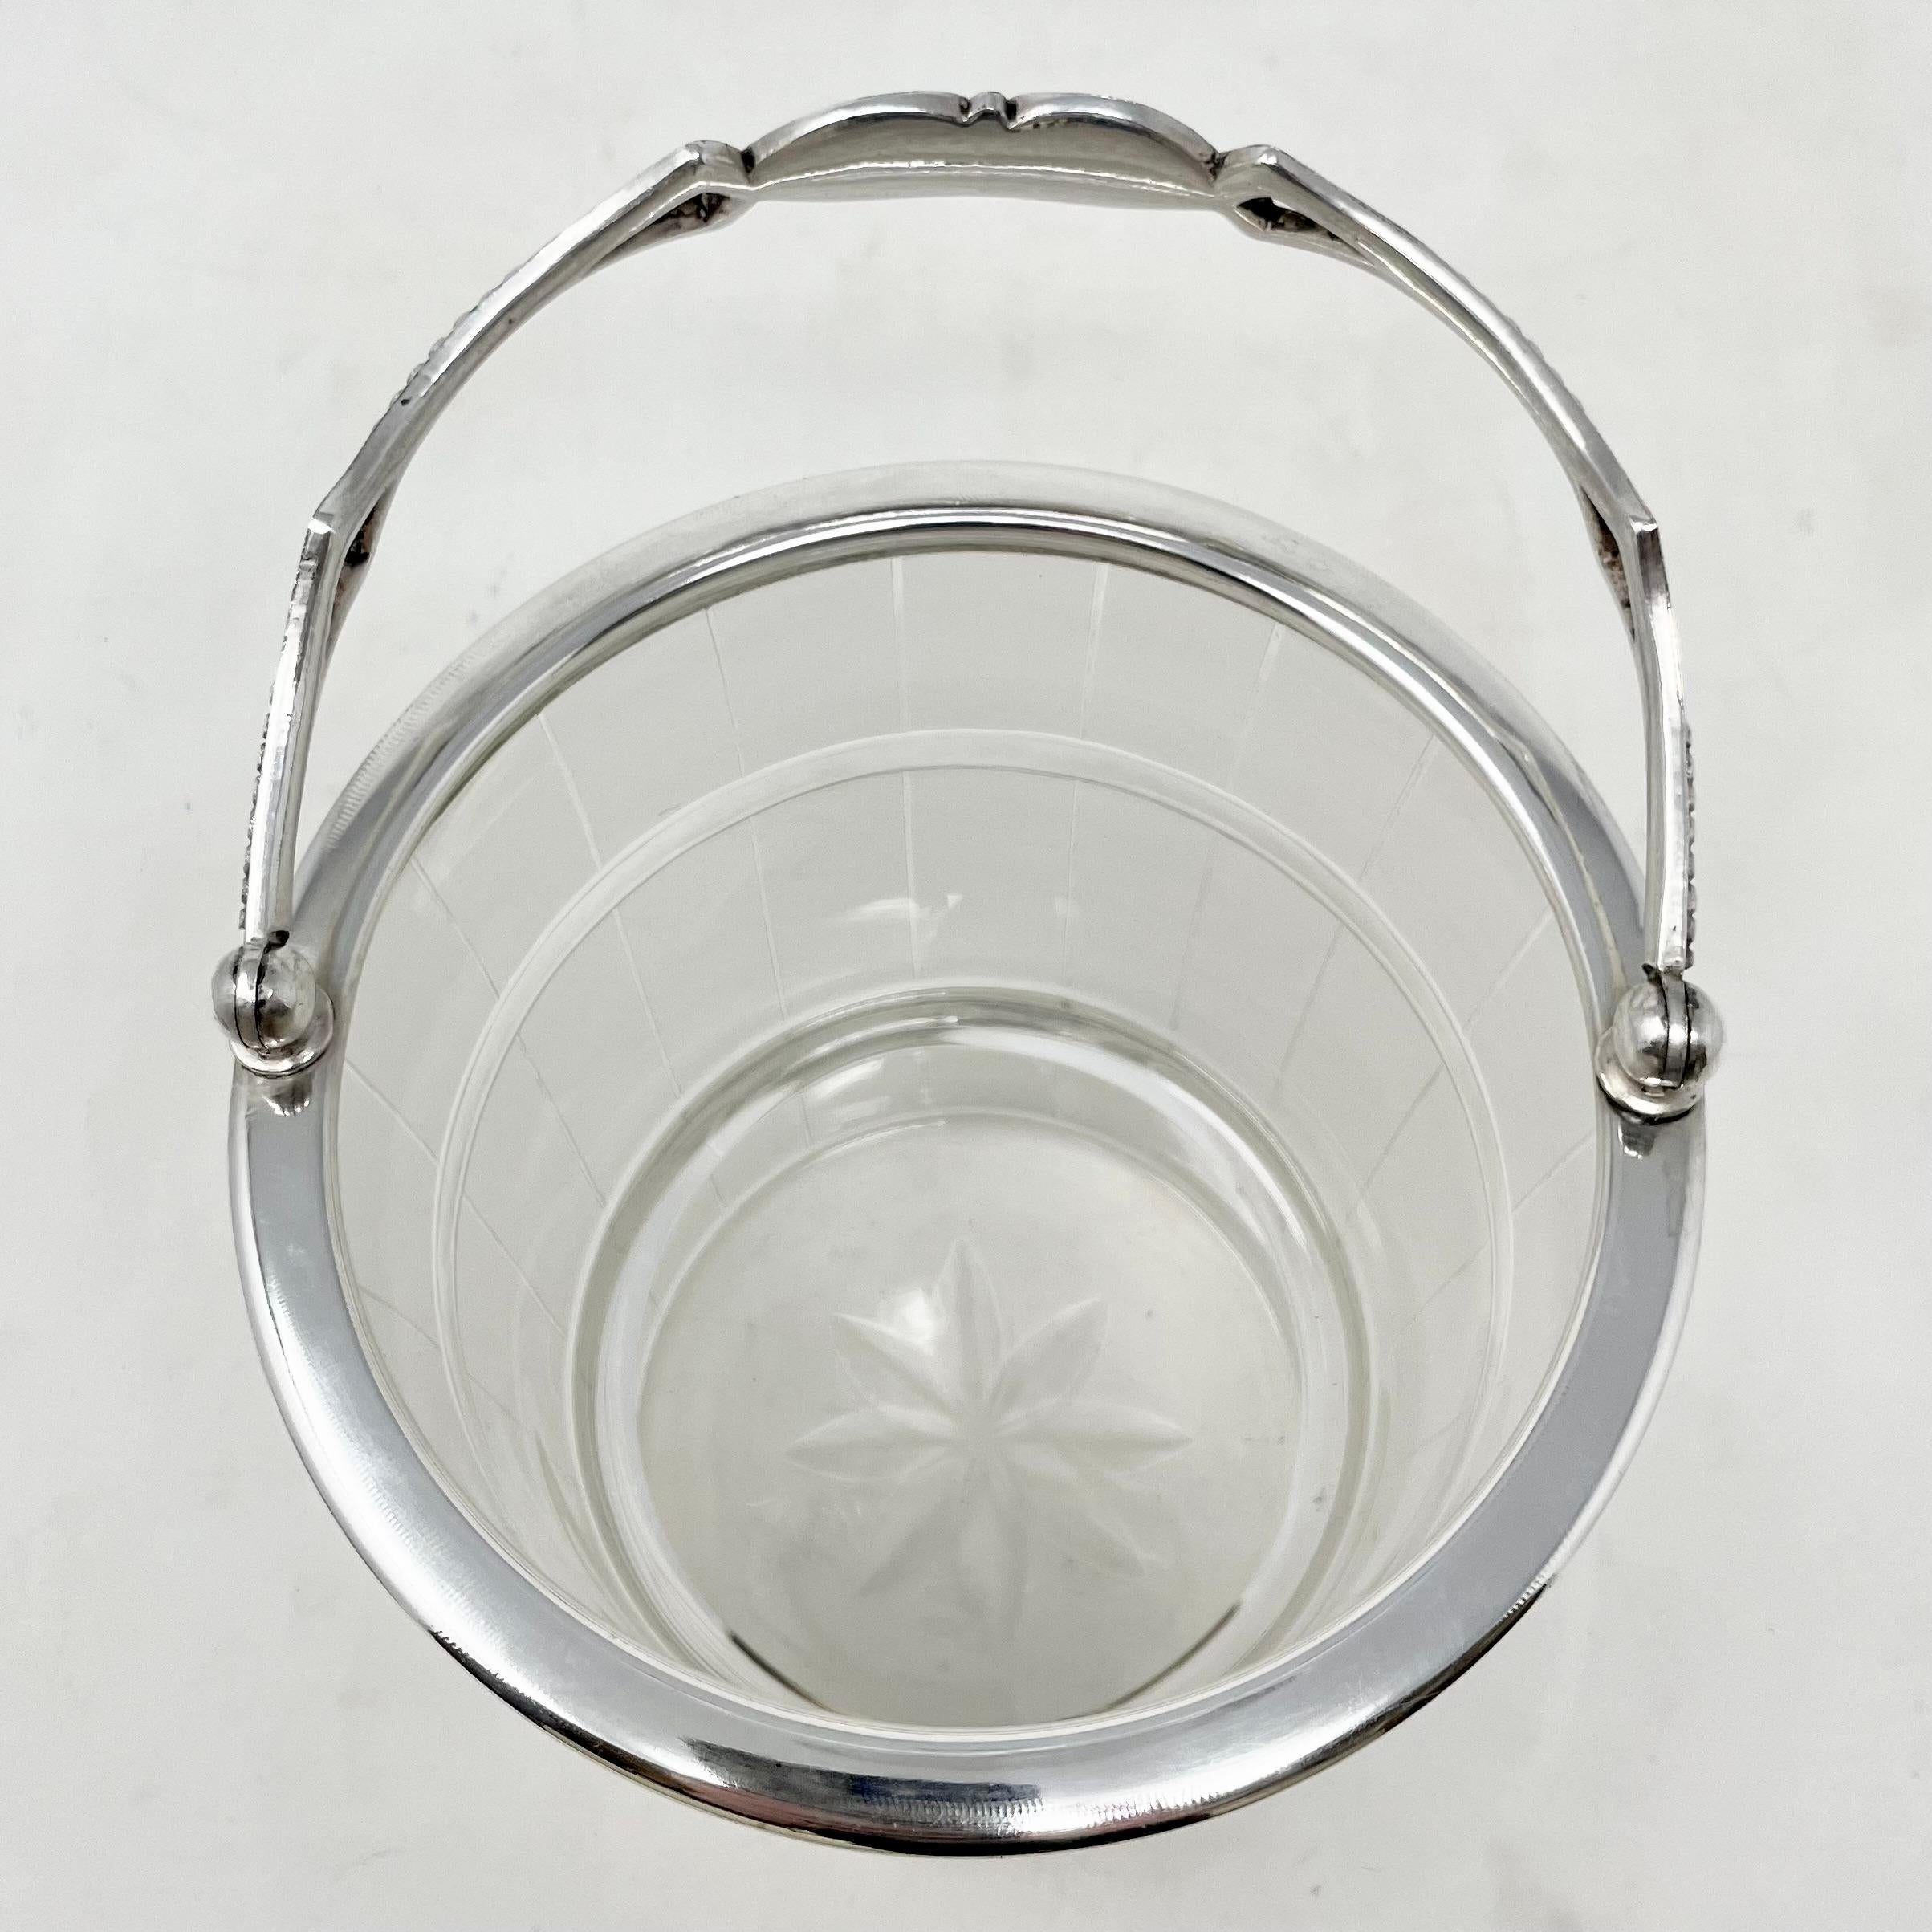 20th Century Antique English Art Deco Silver-Plate & Frosted Glass Ice Bucket, Ca 1920-1930.